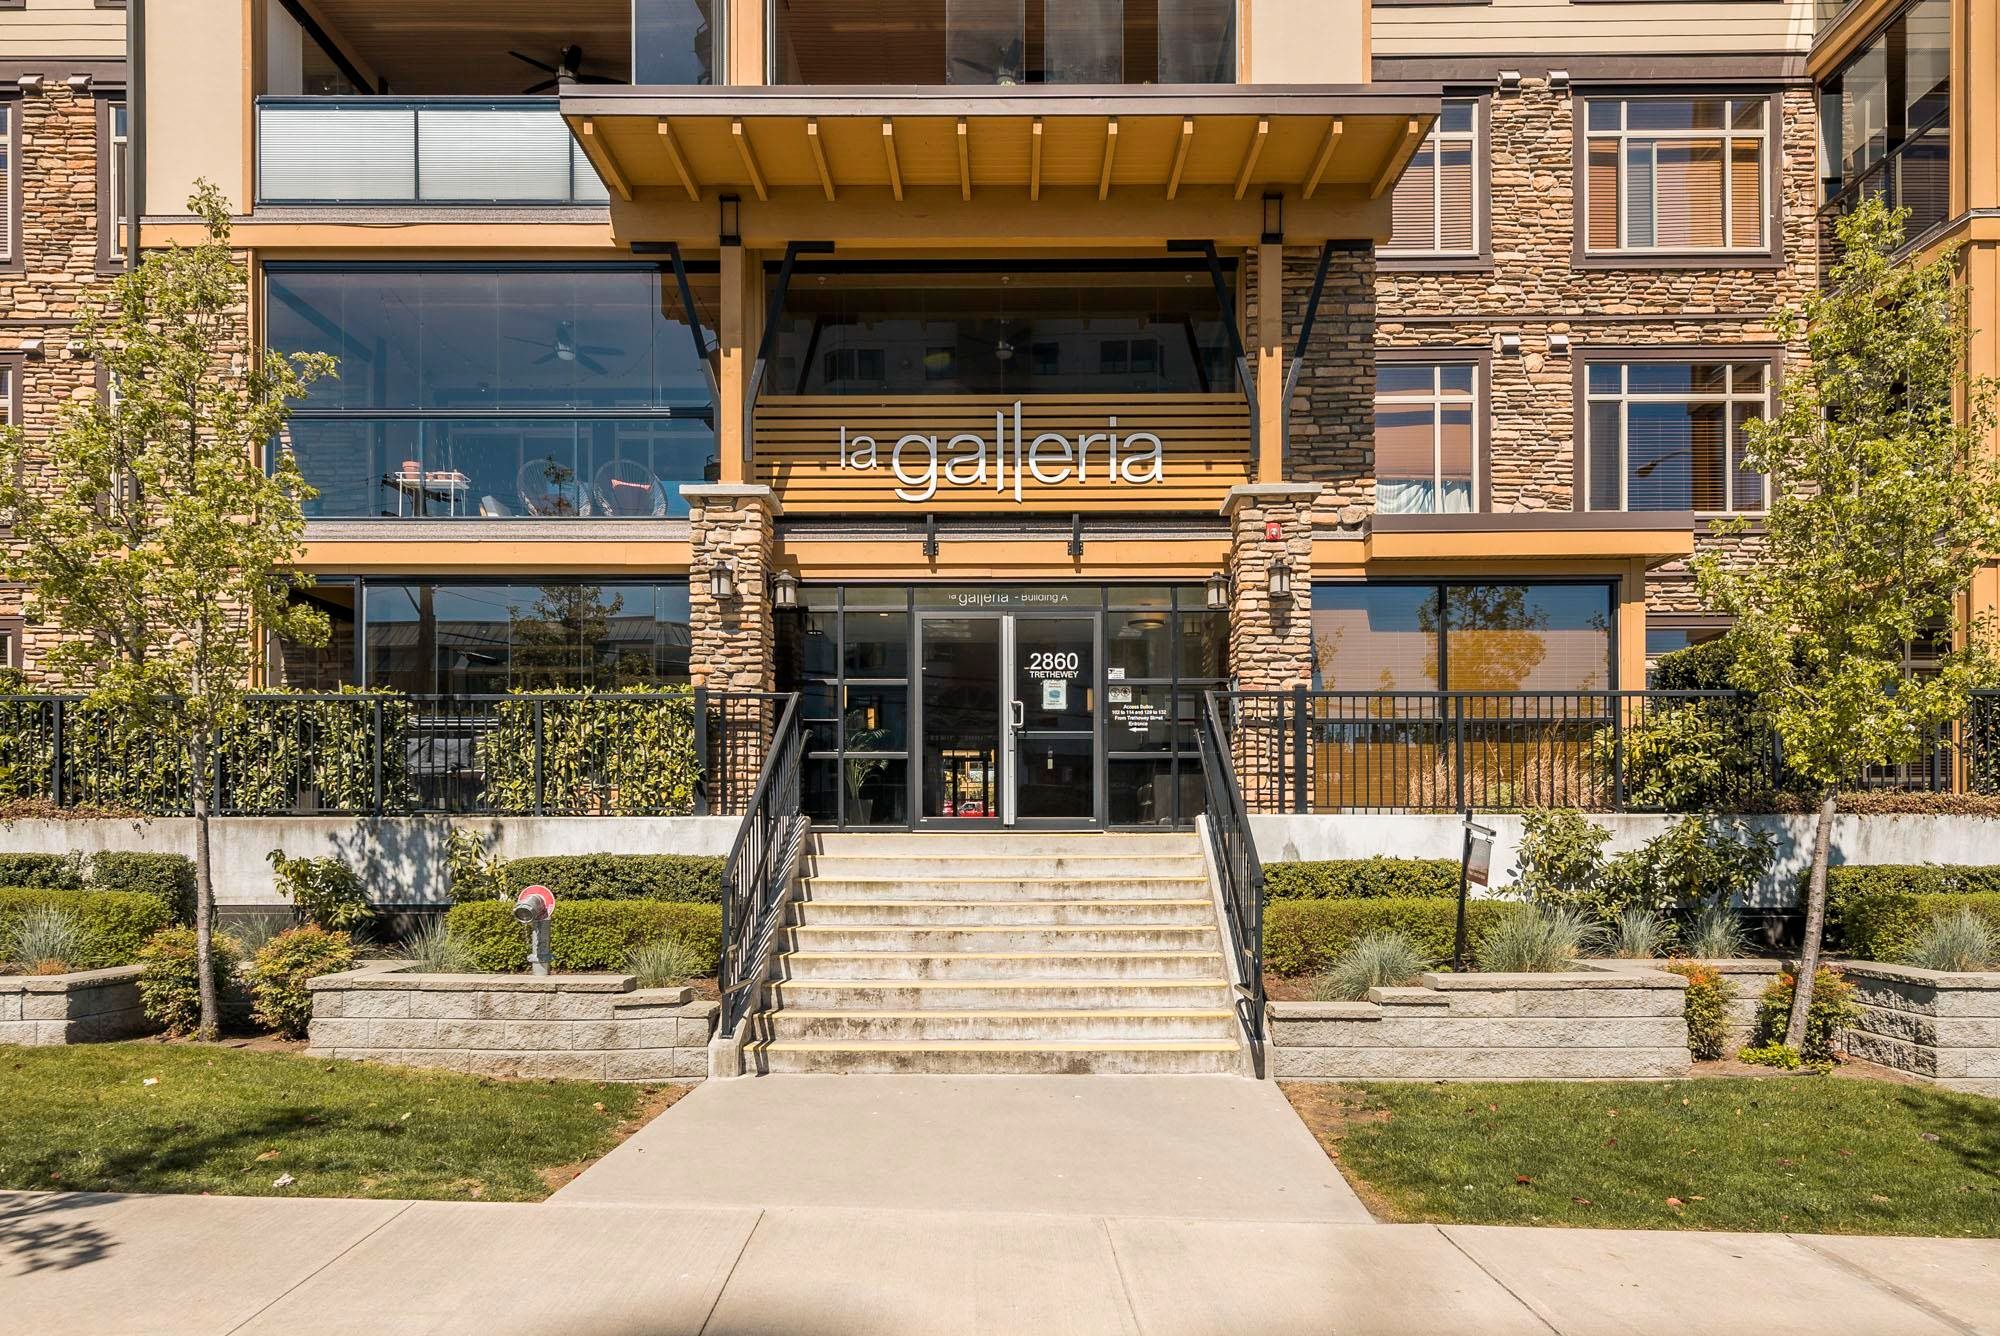 Open House. Open House on Saturday, August 27, 2022 1:00PM - 4:00PM
Upscale 1 Bedroom and Den condo with 968 sq ft of living area at La Galleria in Abbotsford. Solarium plus a private gated patio with walkout to a treed courtyard. Great location close to 